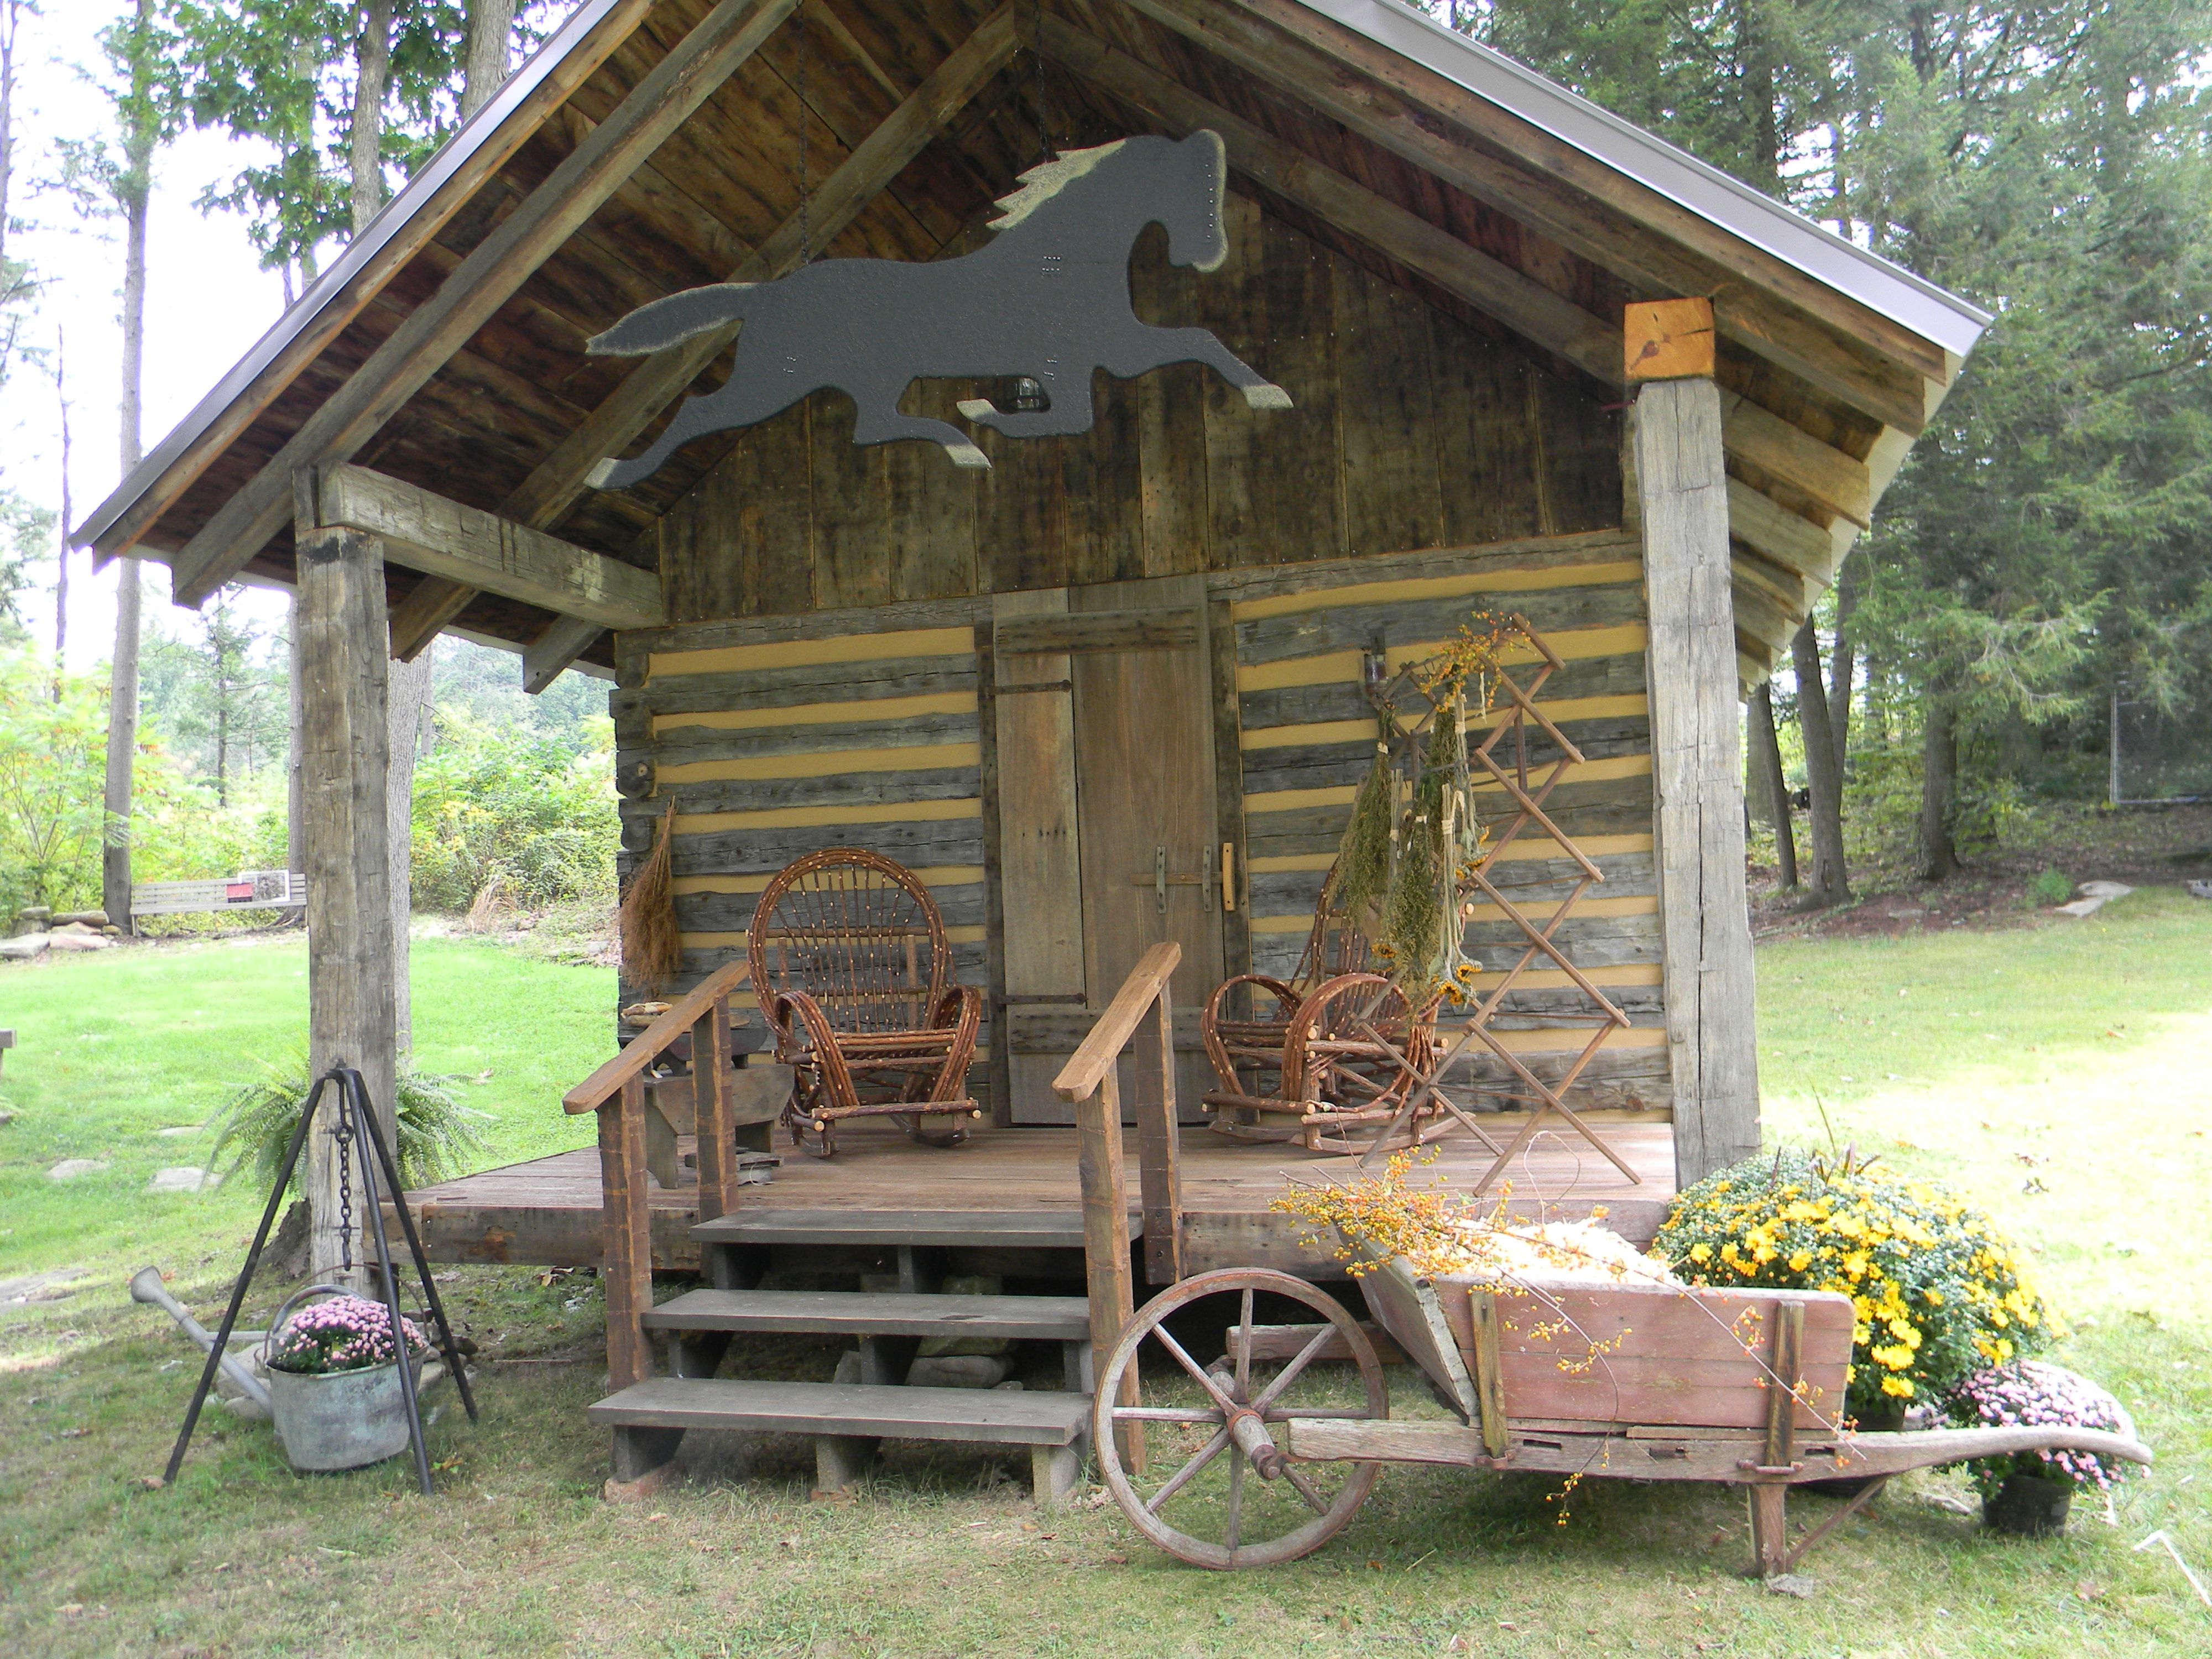 Old Rustic Log Cabins - Bing Images | Country Cabins | Pinterest ...